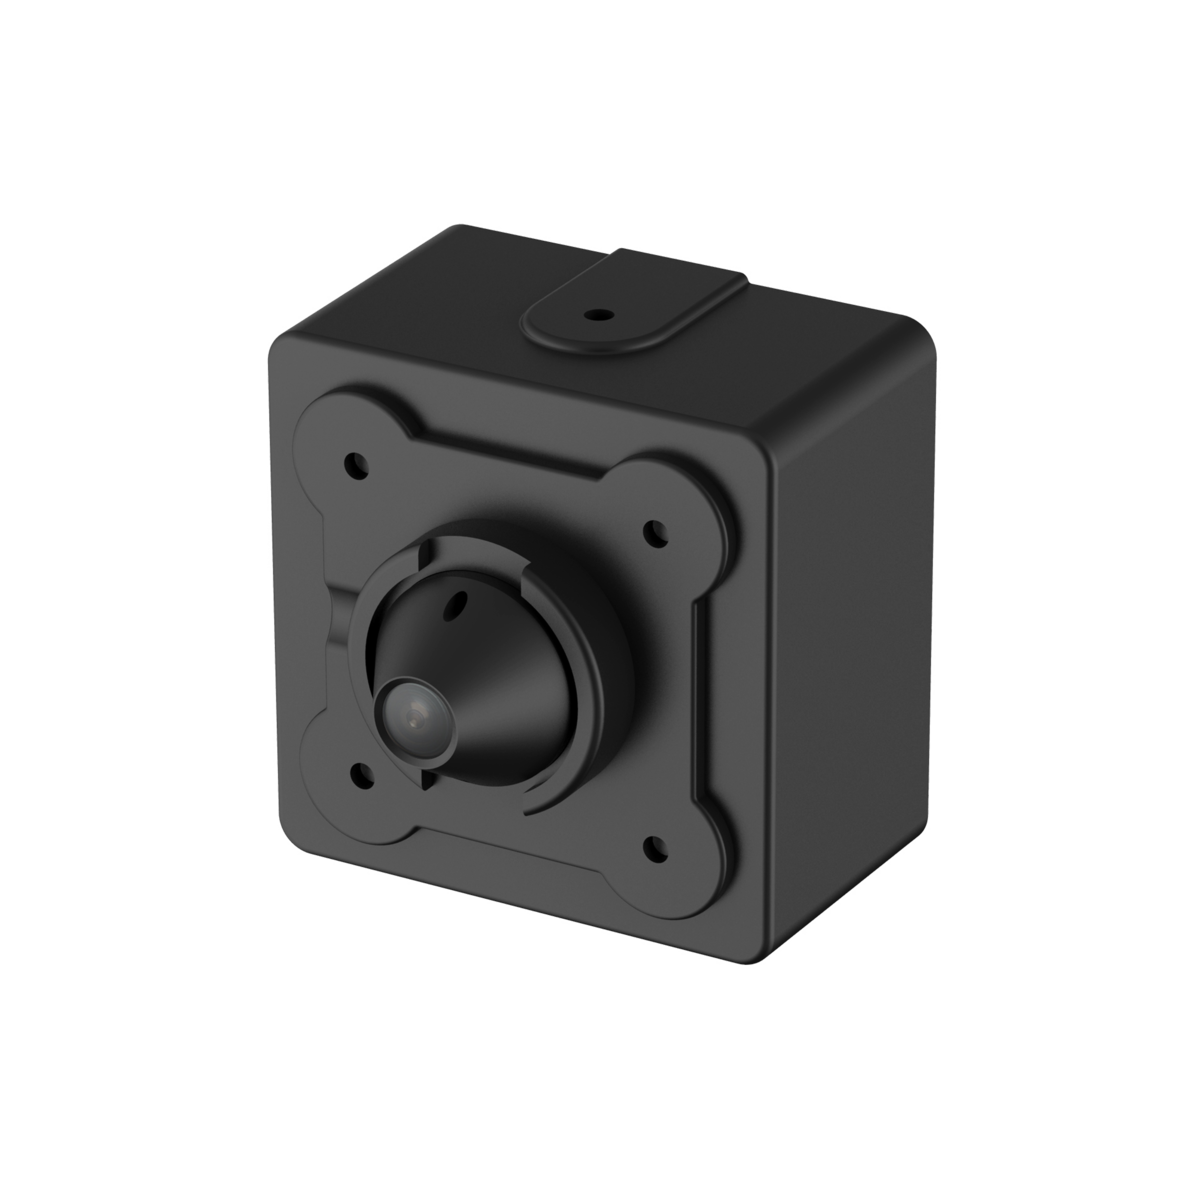 MICROSIZE SERIES IP CAMERA BLACK PINHOLE 4MP CUBE(LENS ONLY) 120 WDR METAL 2.8MM FIXED LENS NO IR WITHOUT MIC NO-SD CARD SLOT